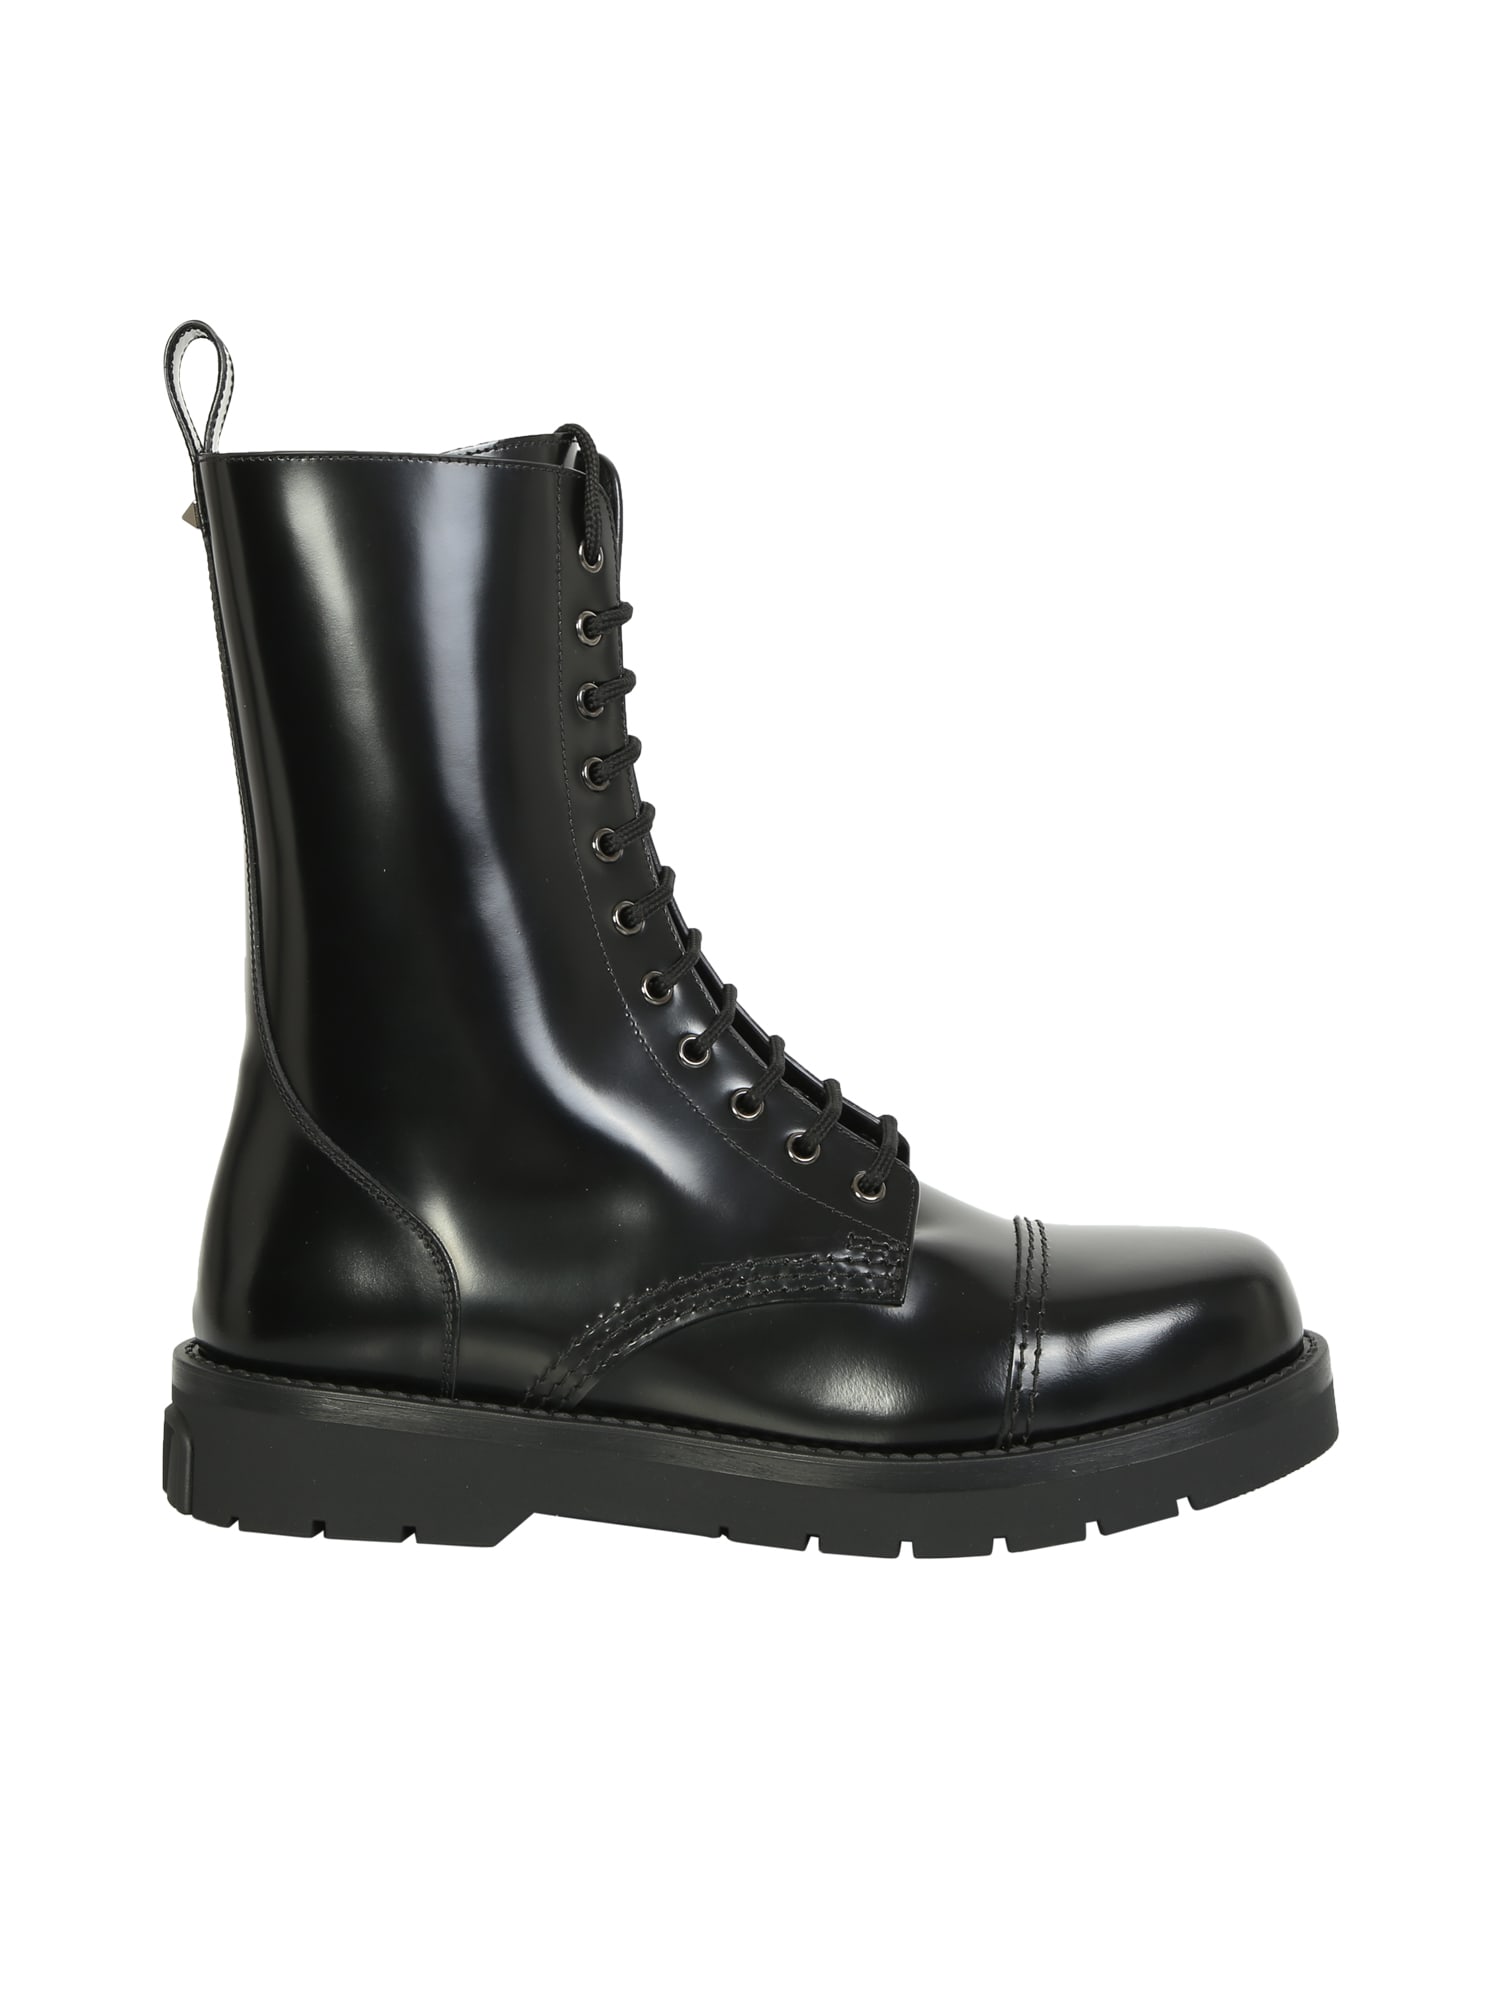 Valentino Boots From The Eccentric Area By; Comfortable And With A Polished Finish